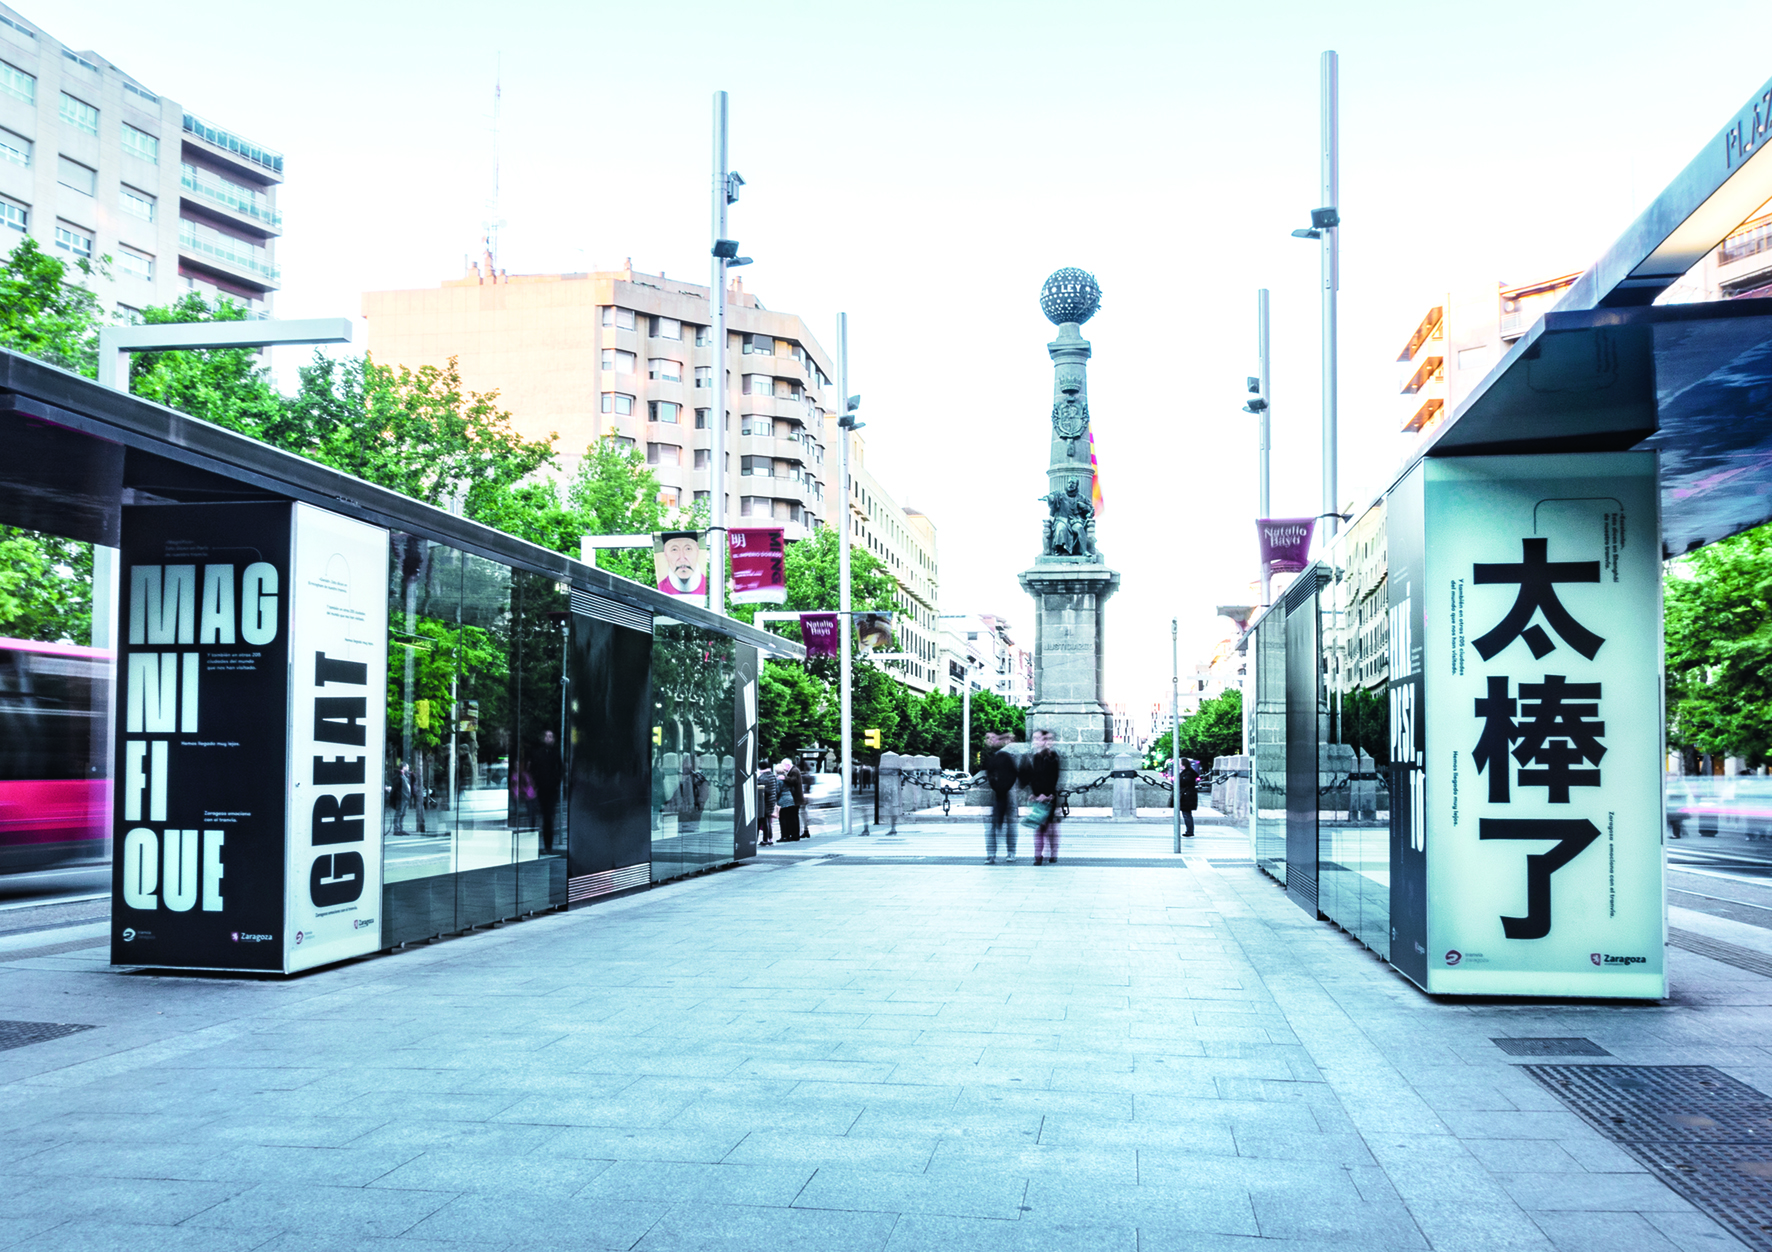 Zaragoza excites with the tram by Anto Moreno - Creative Work